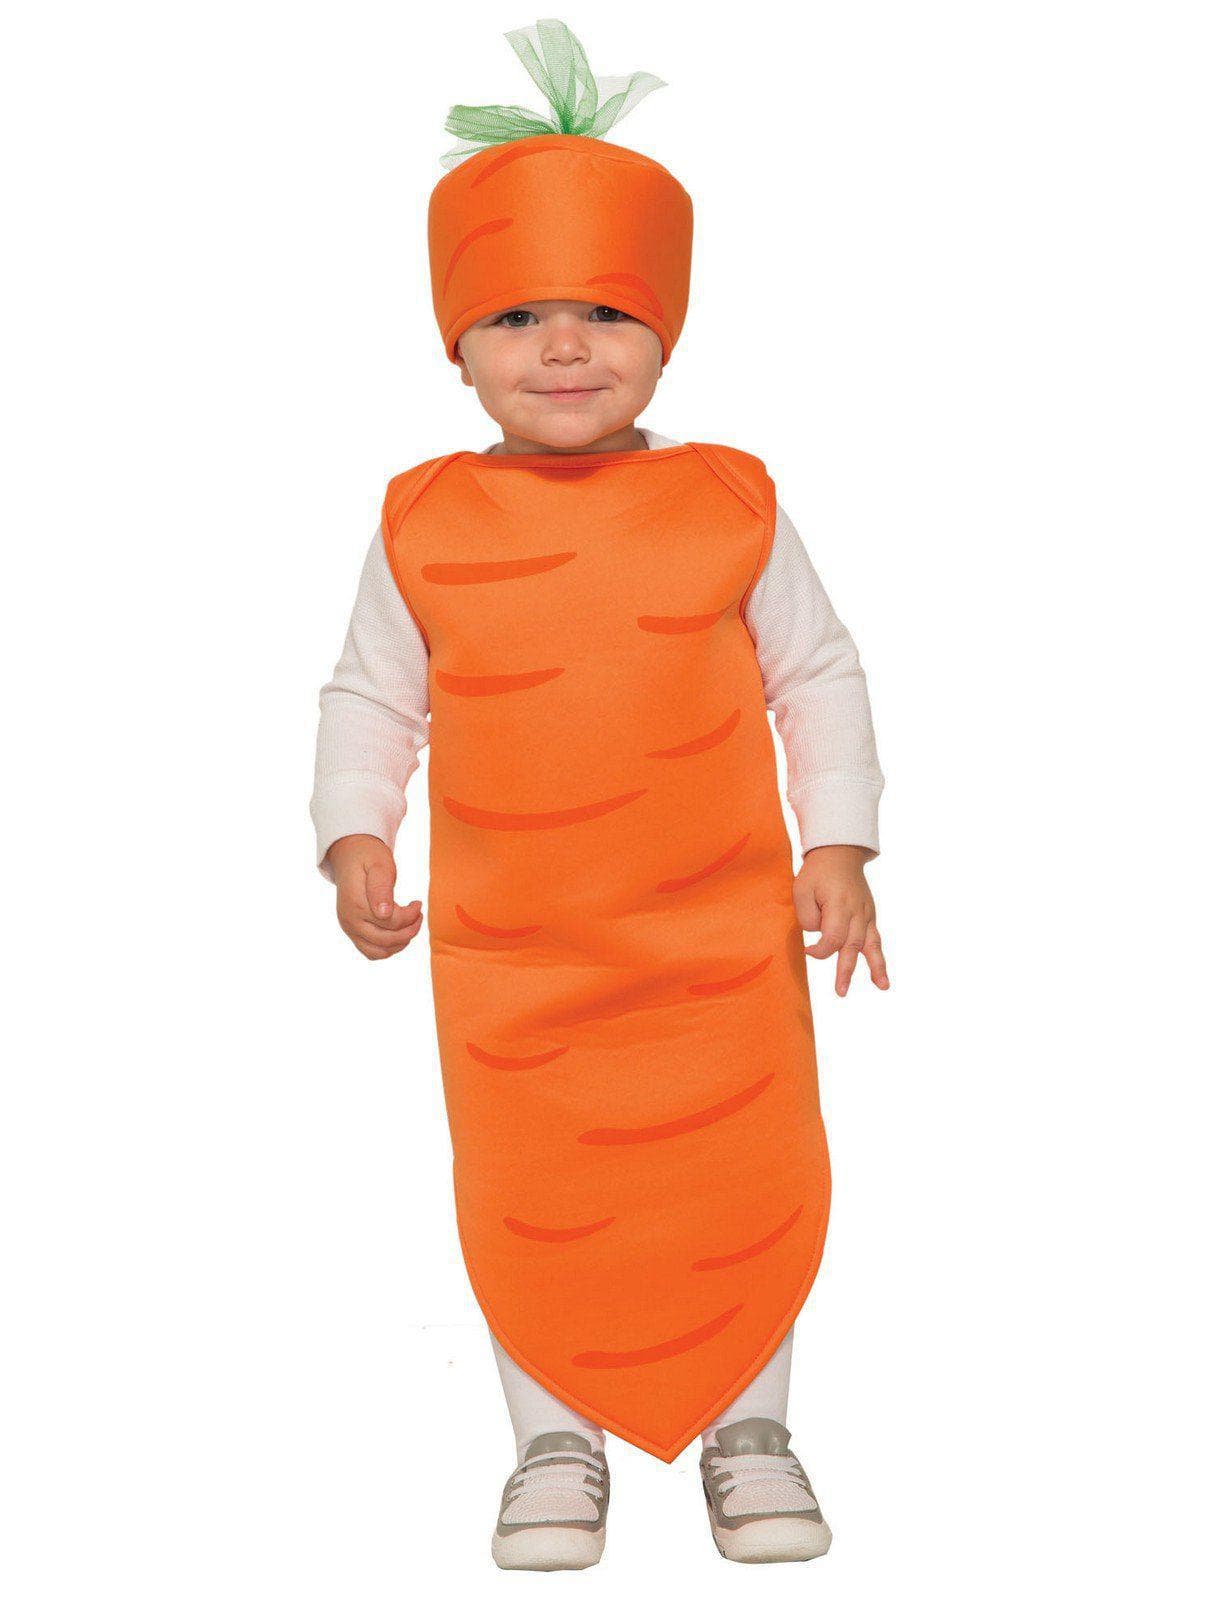 Baby/Toddler Baby Carrot Costume - costumes.com